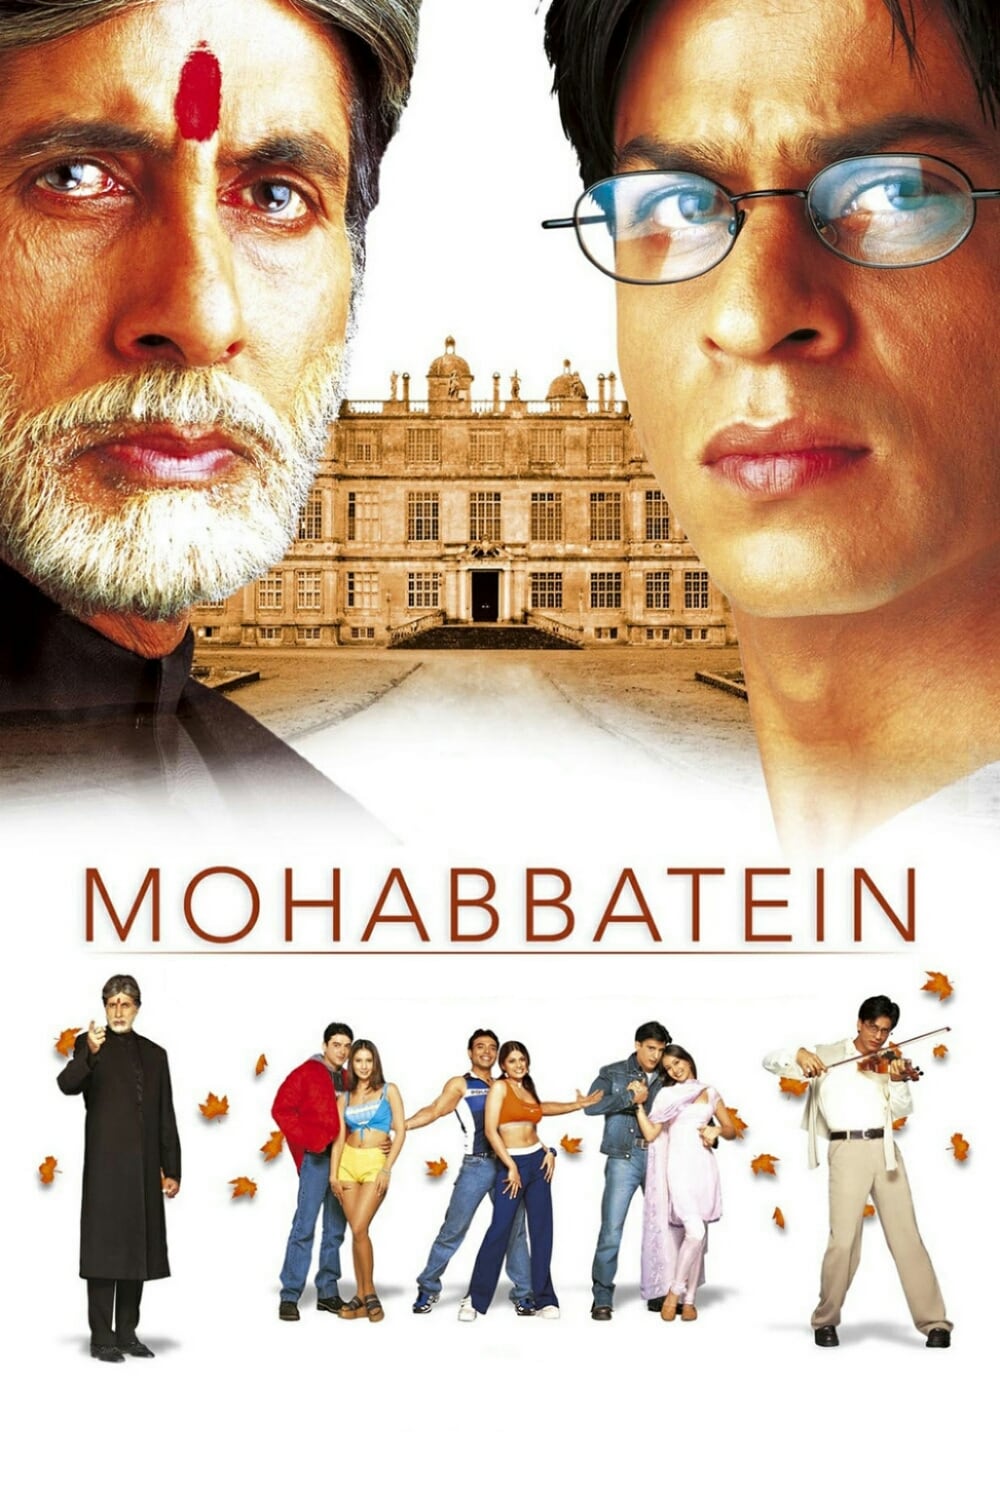 Poster for the movie "Mohabbatein"